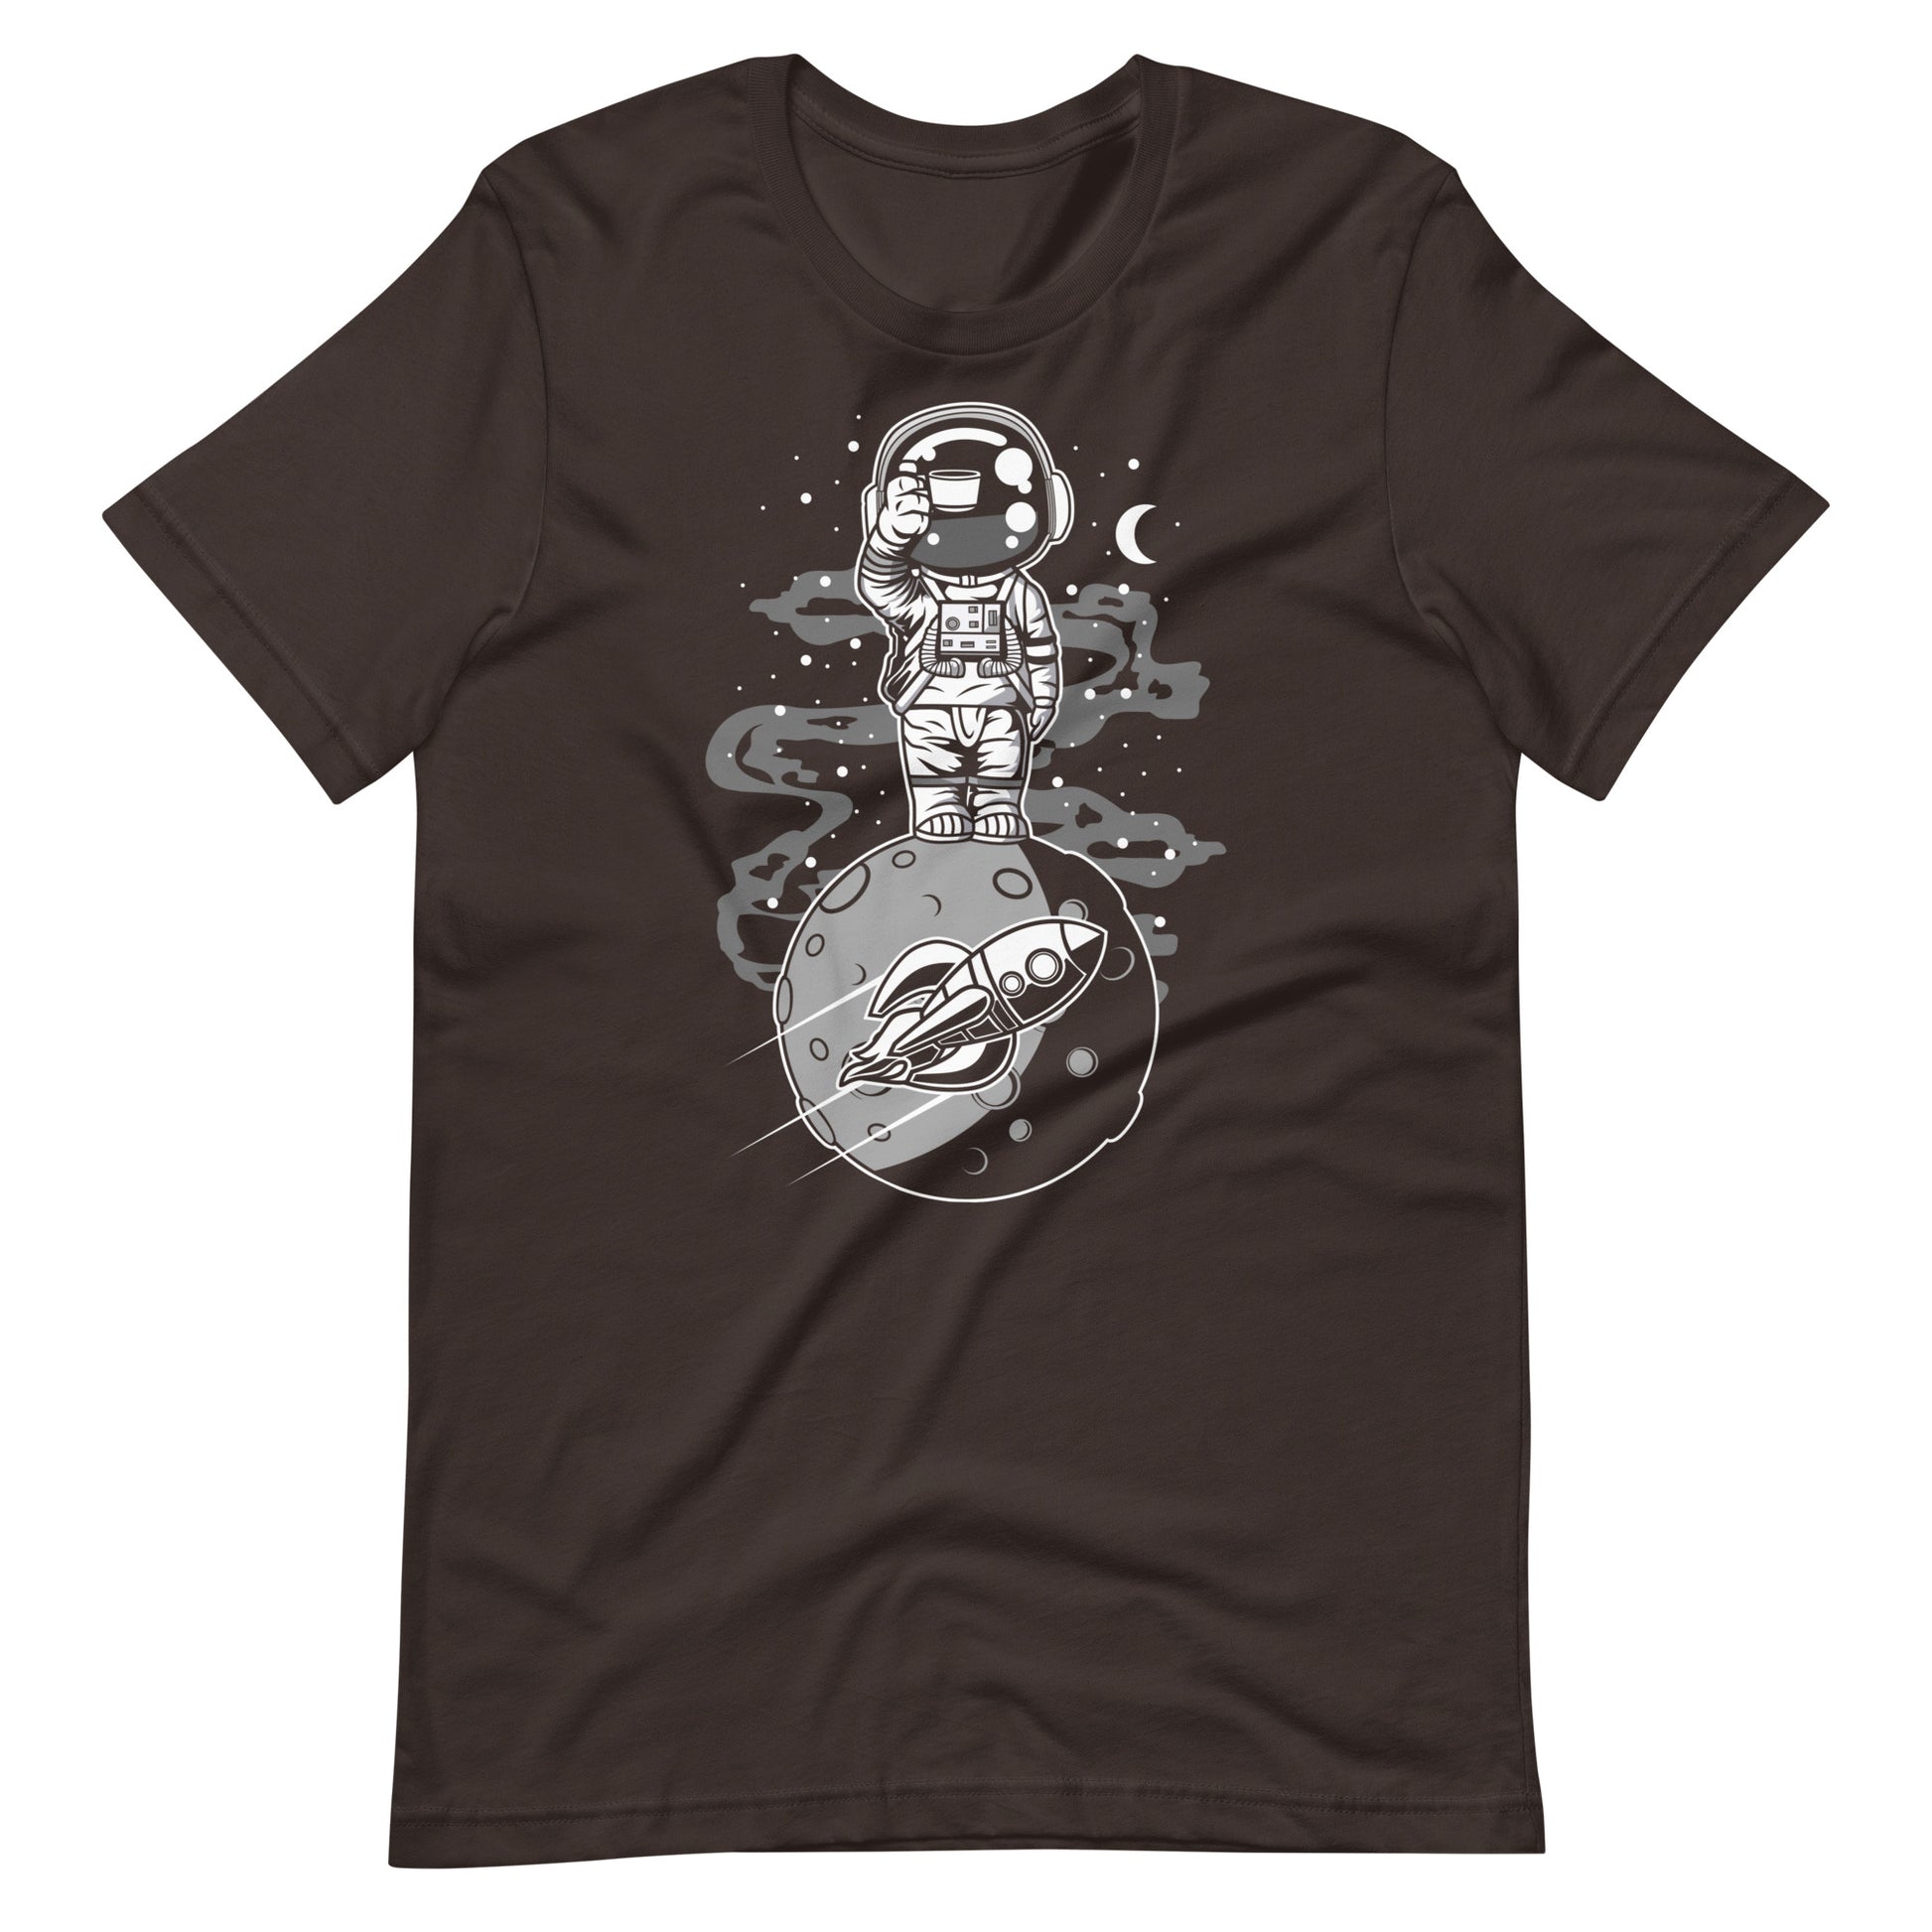 Astronaut Standing on the Moon - Men's t-shirt - Brown Front